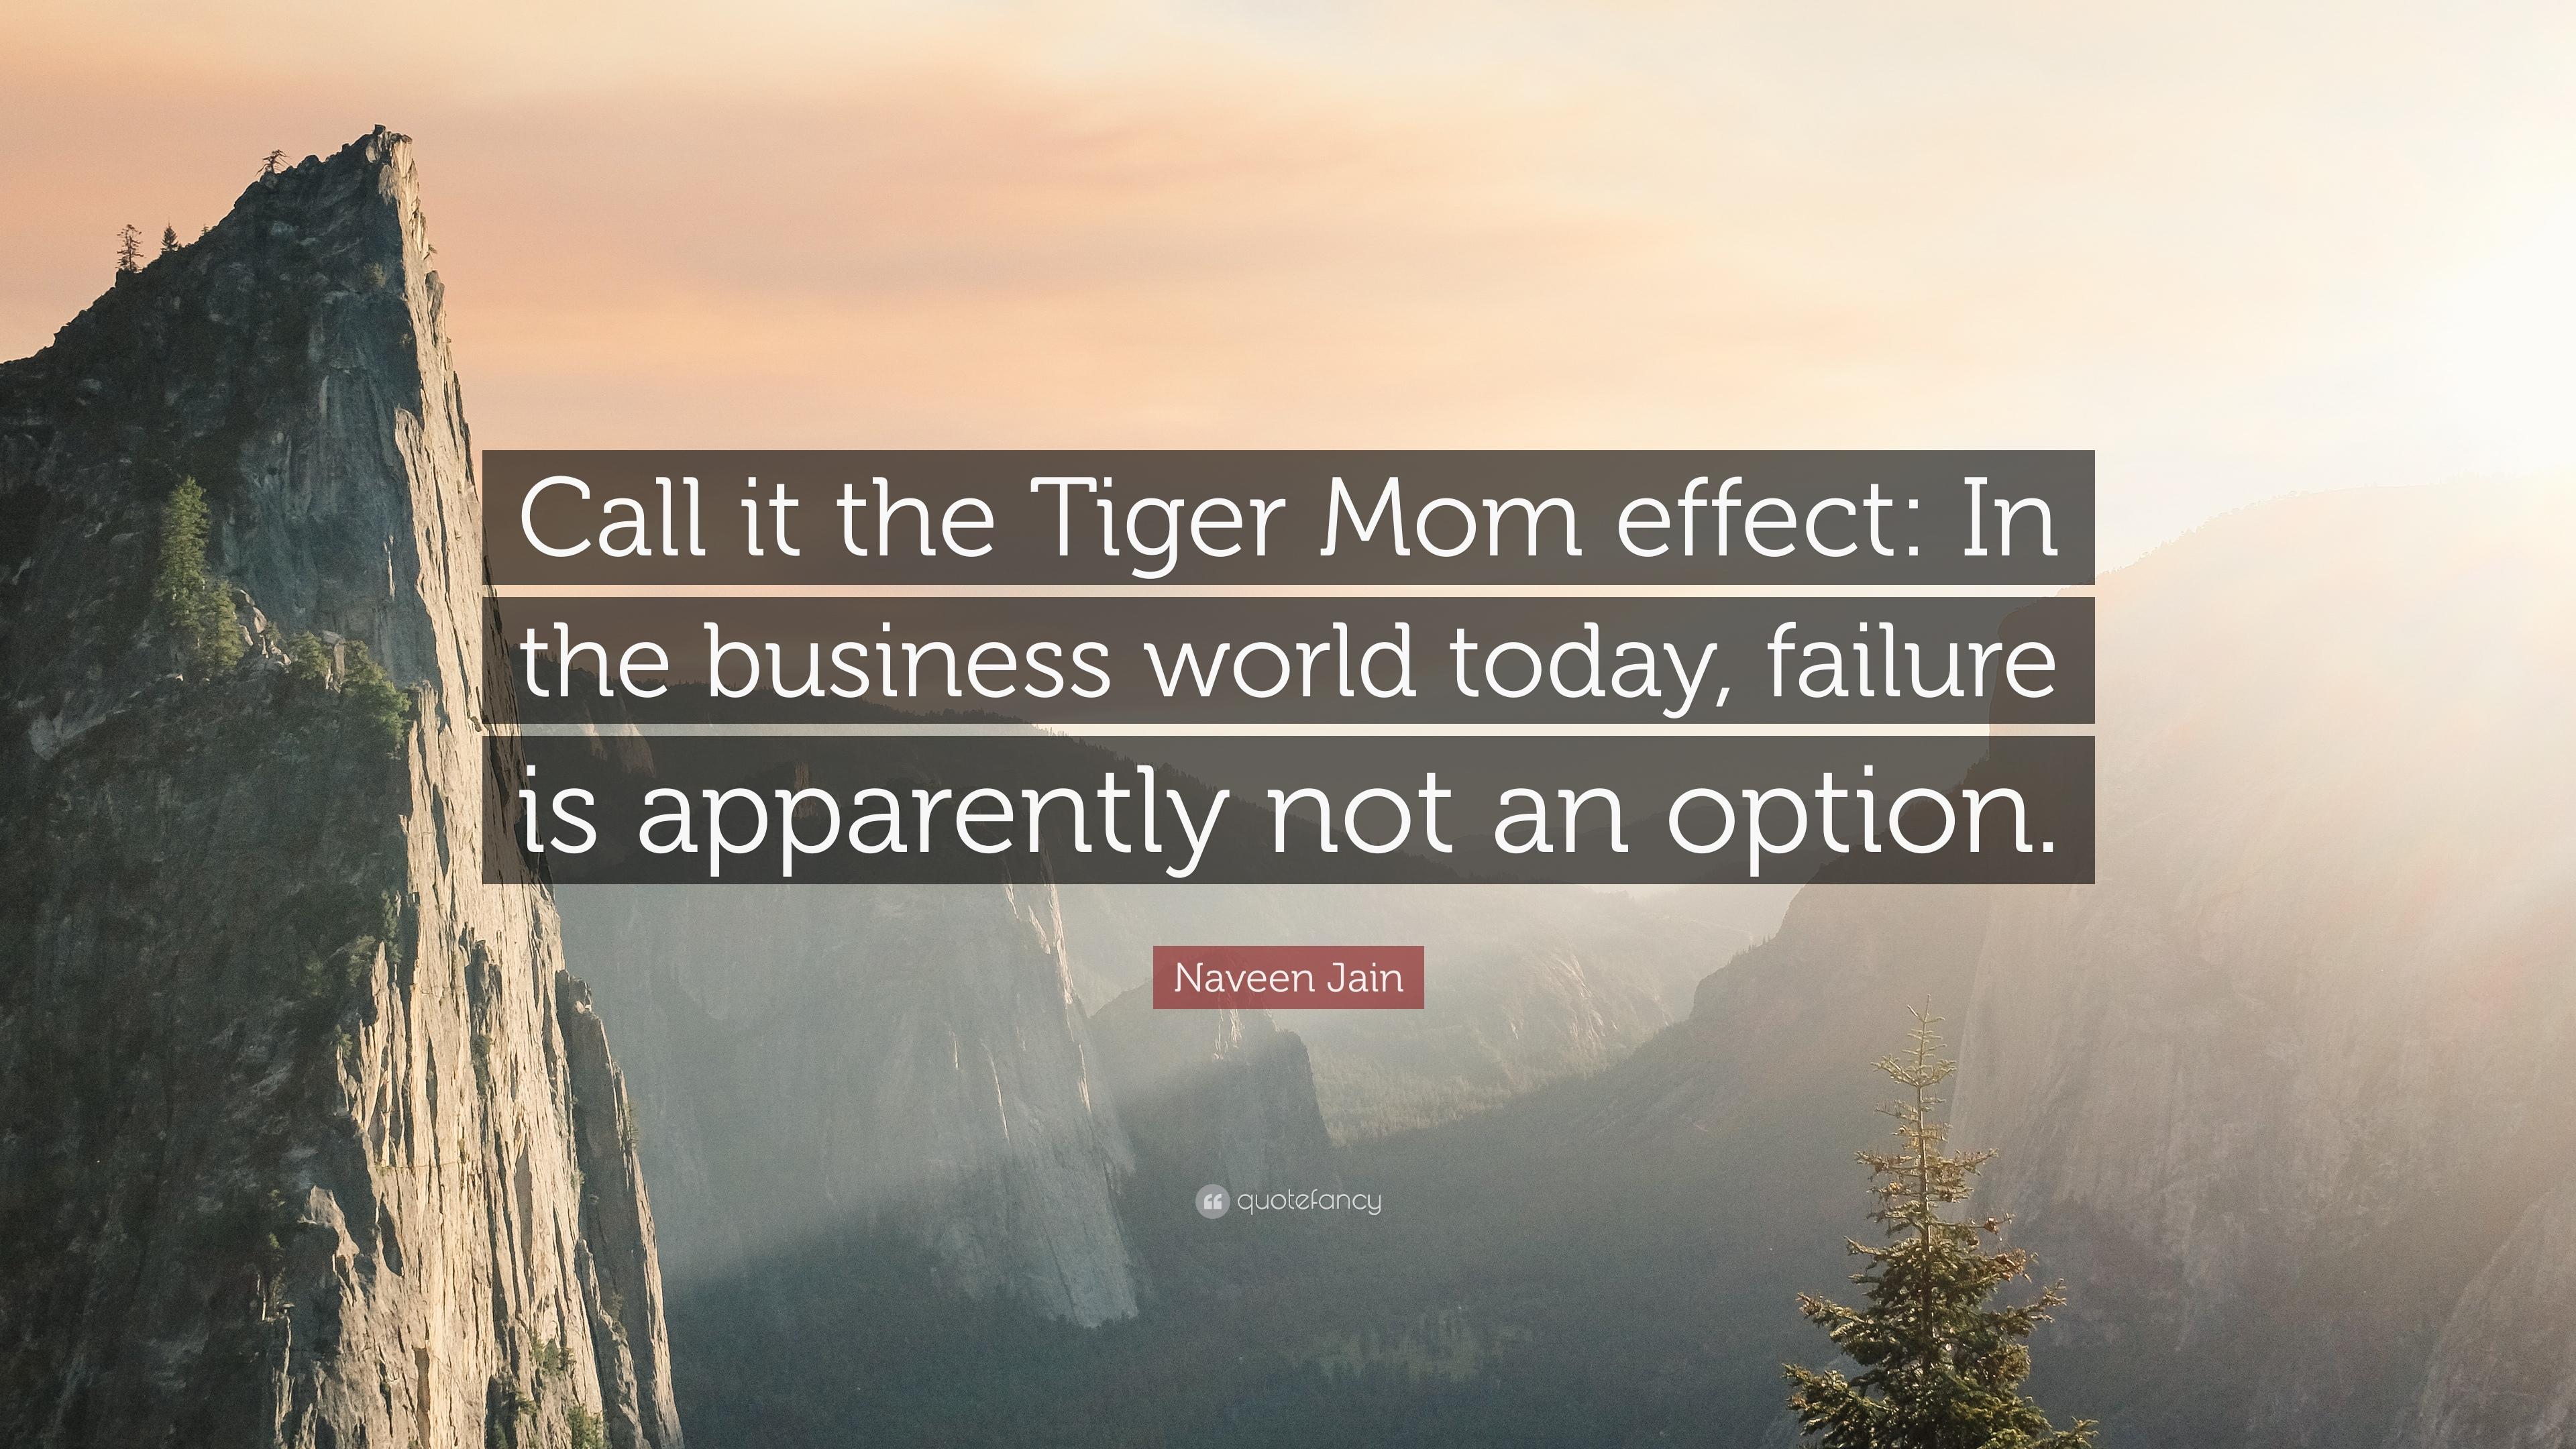 Naveen Jain Quote: “Call it the Tiger Mom effect: In